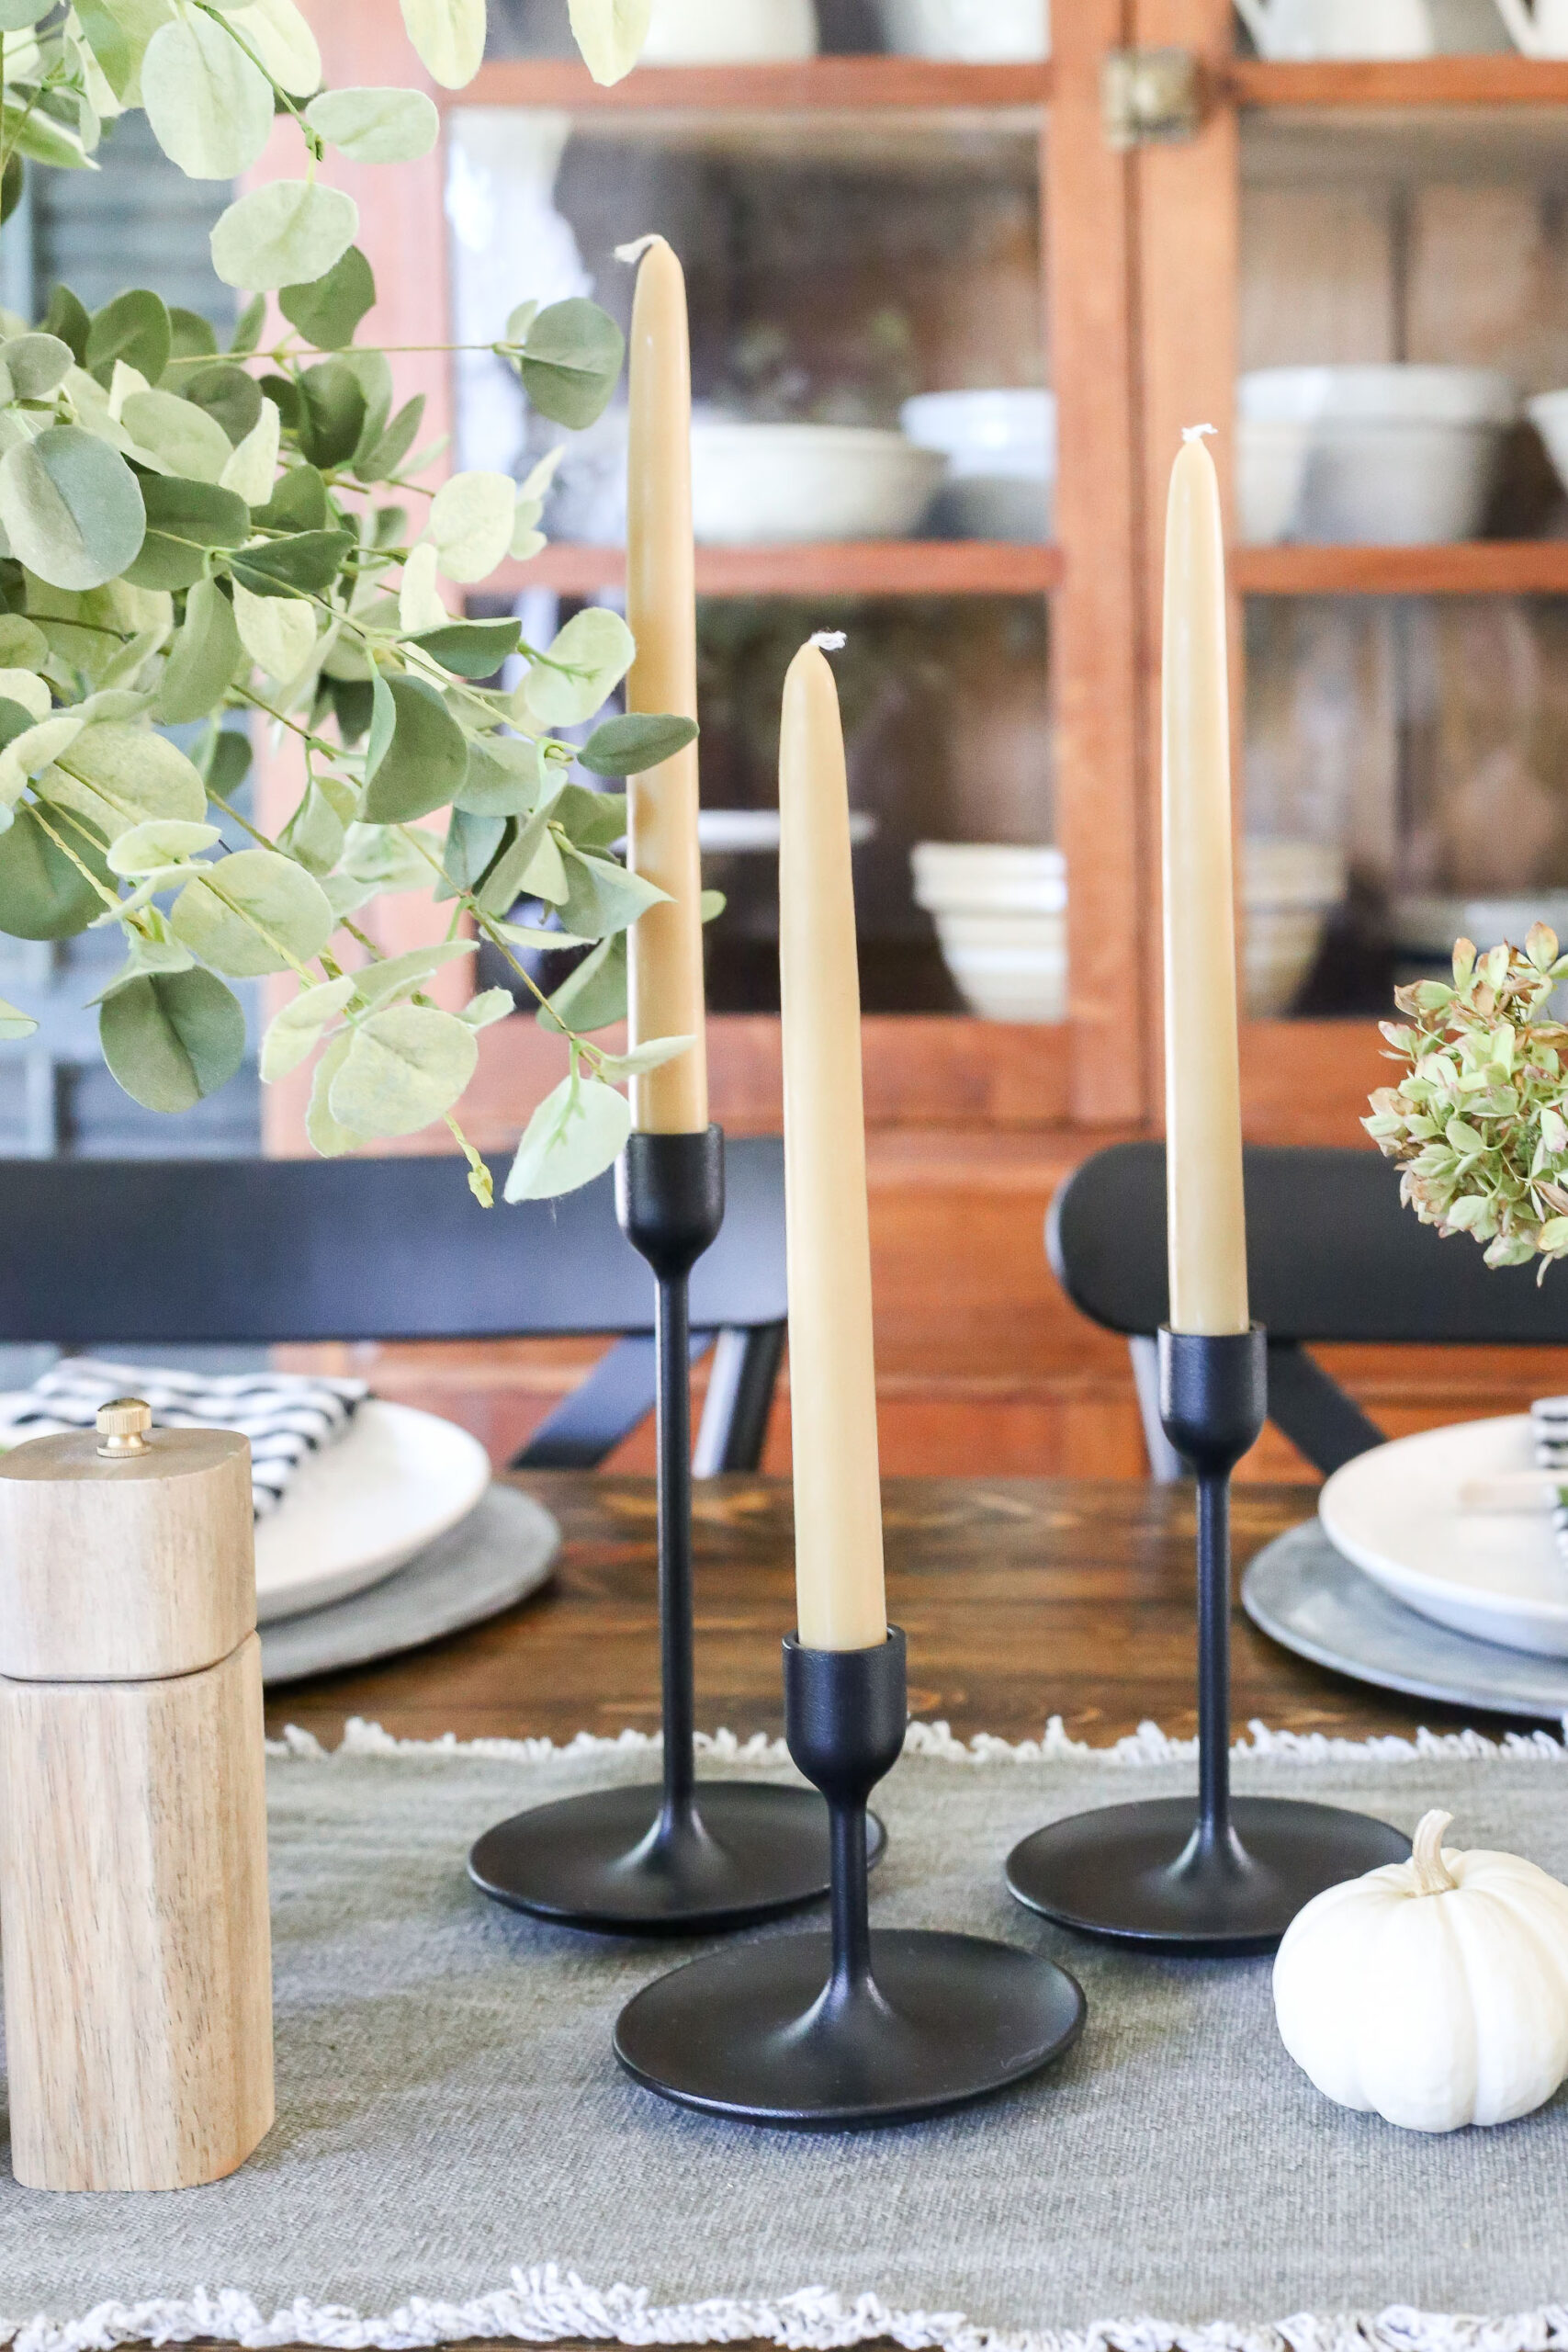 How to decorate the dining room for fall 